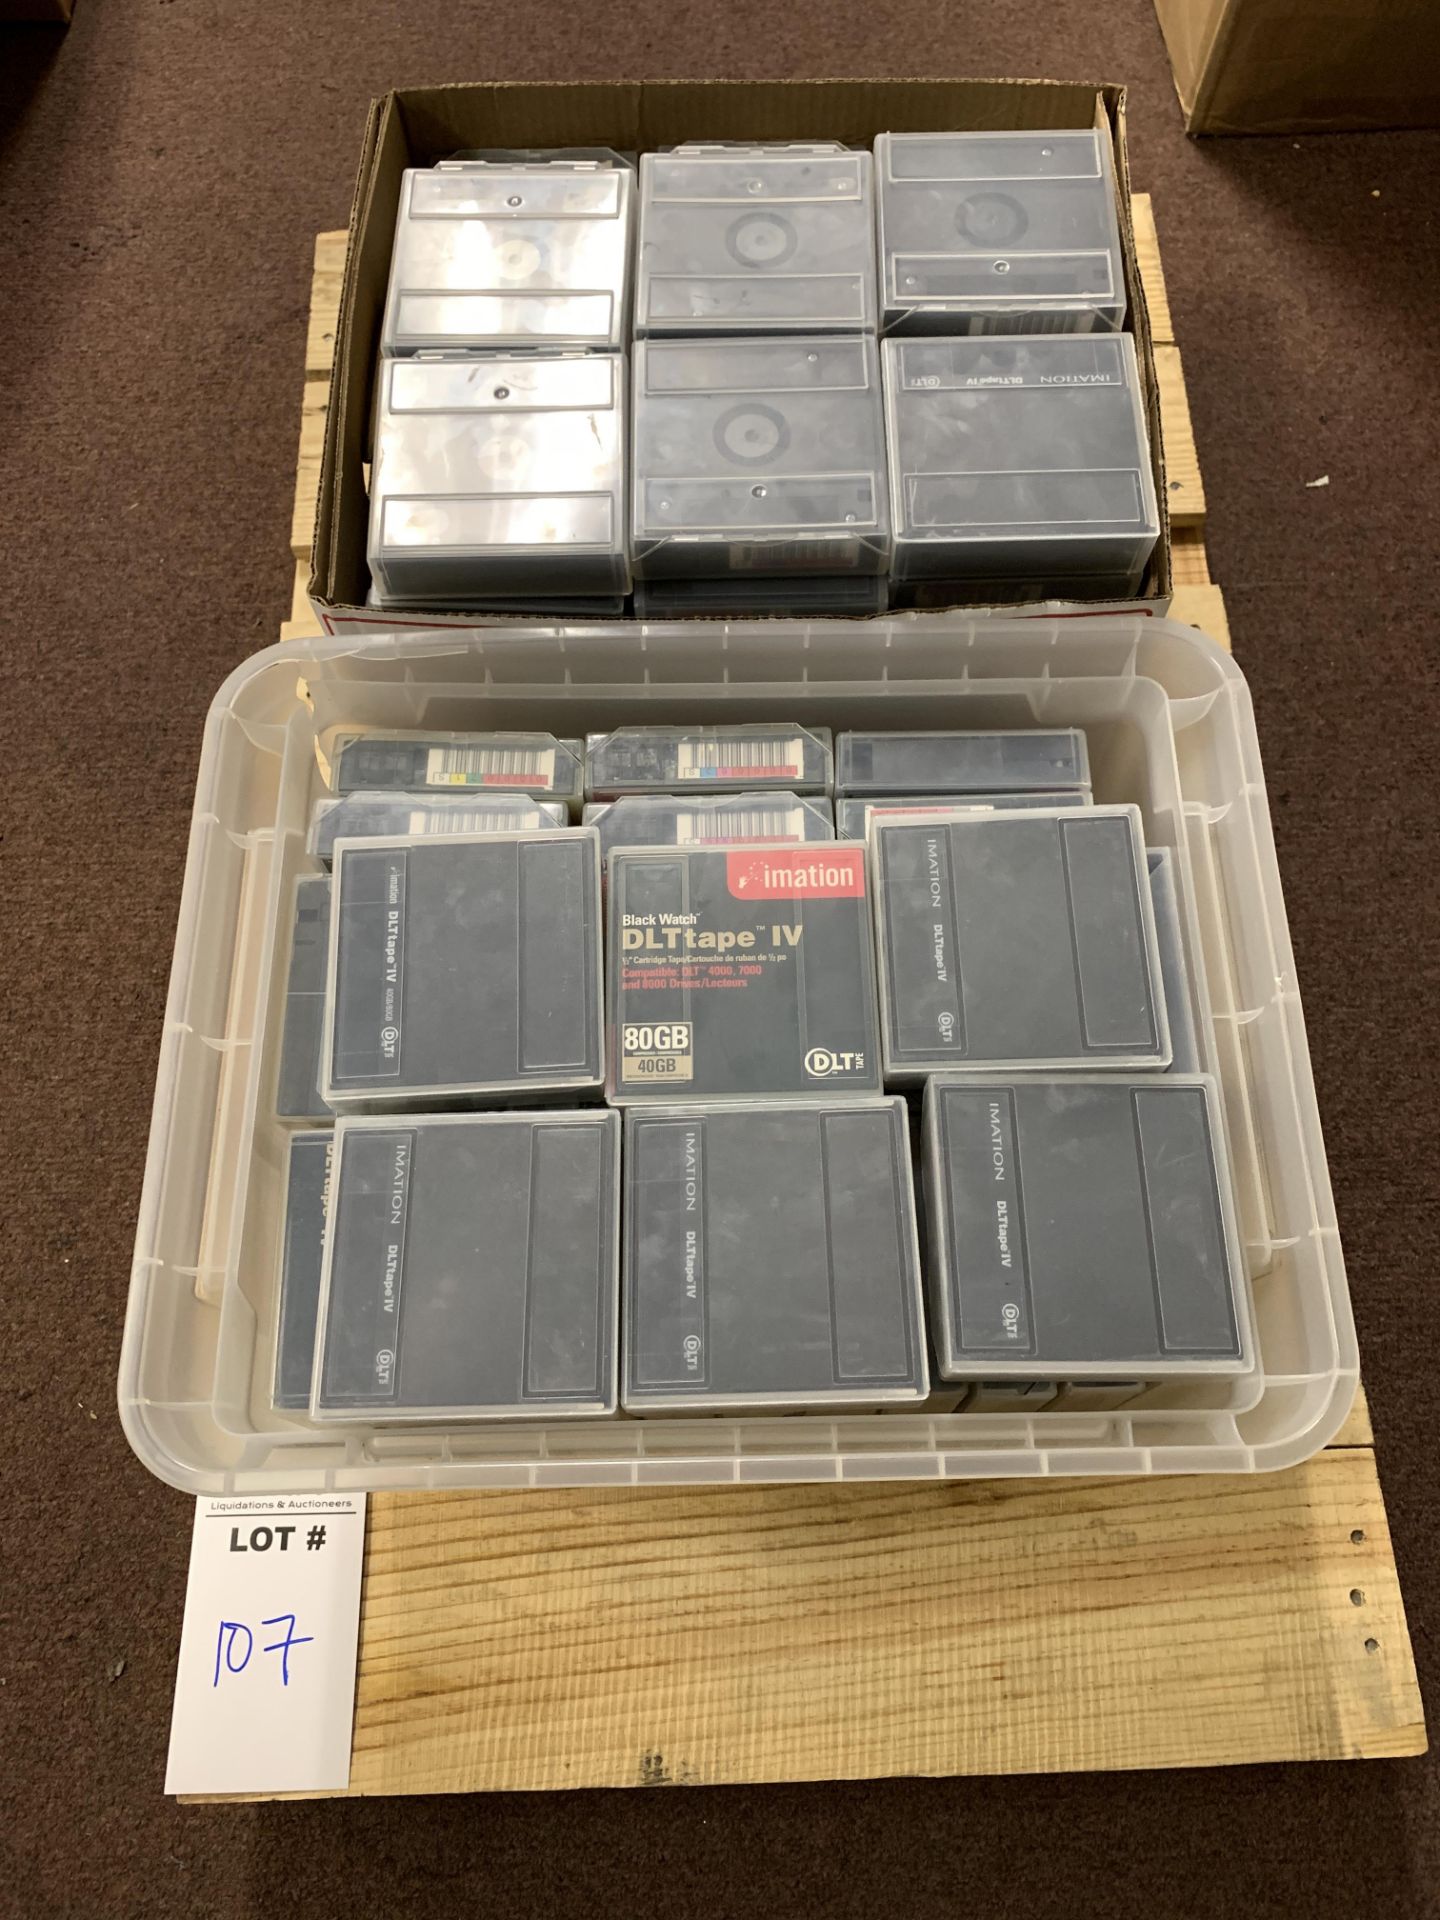 LOT OF 125+ IMATION DLT TAPE IV CARTRIDGES. ALL ITEMS ARE SOLD AS IS UNTESTED BUT CAME FROM A